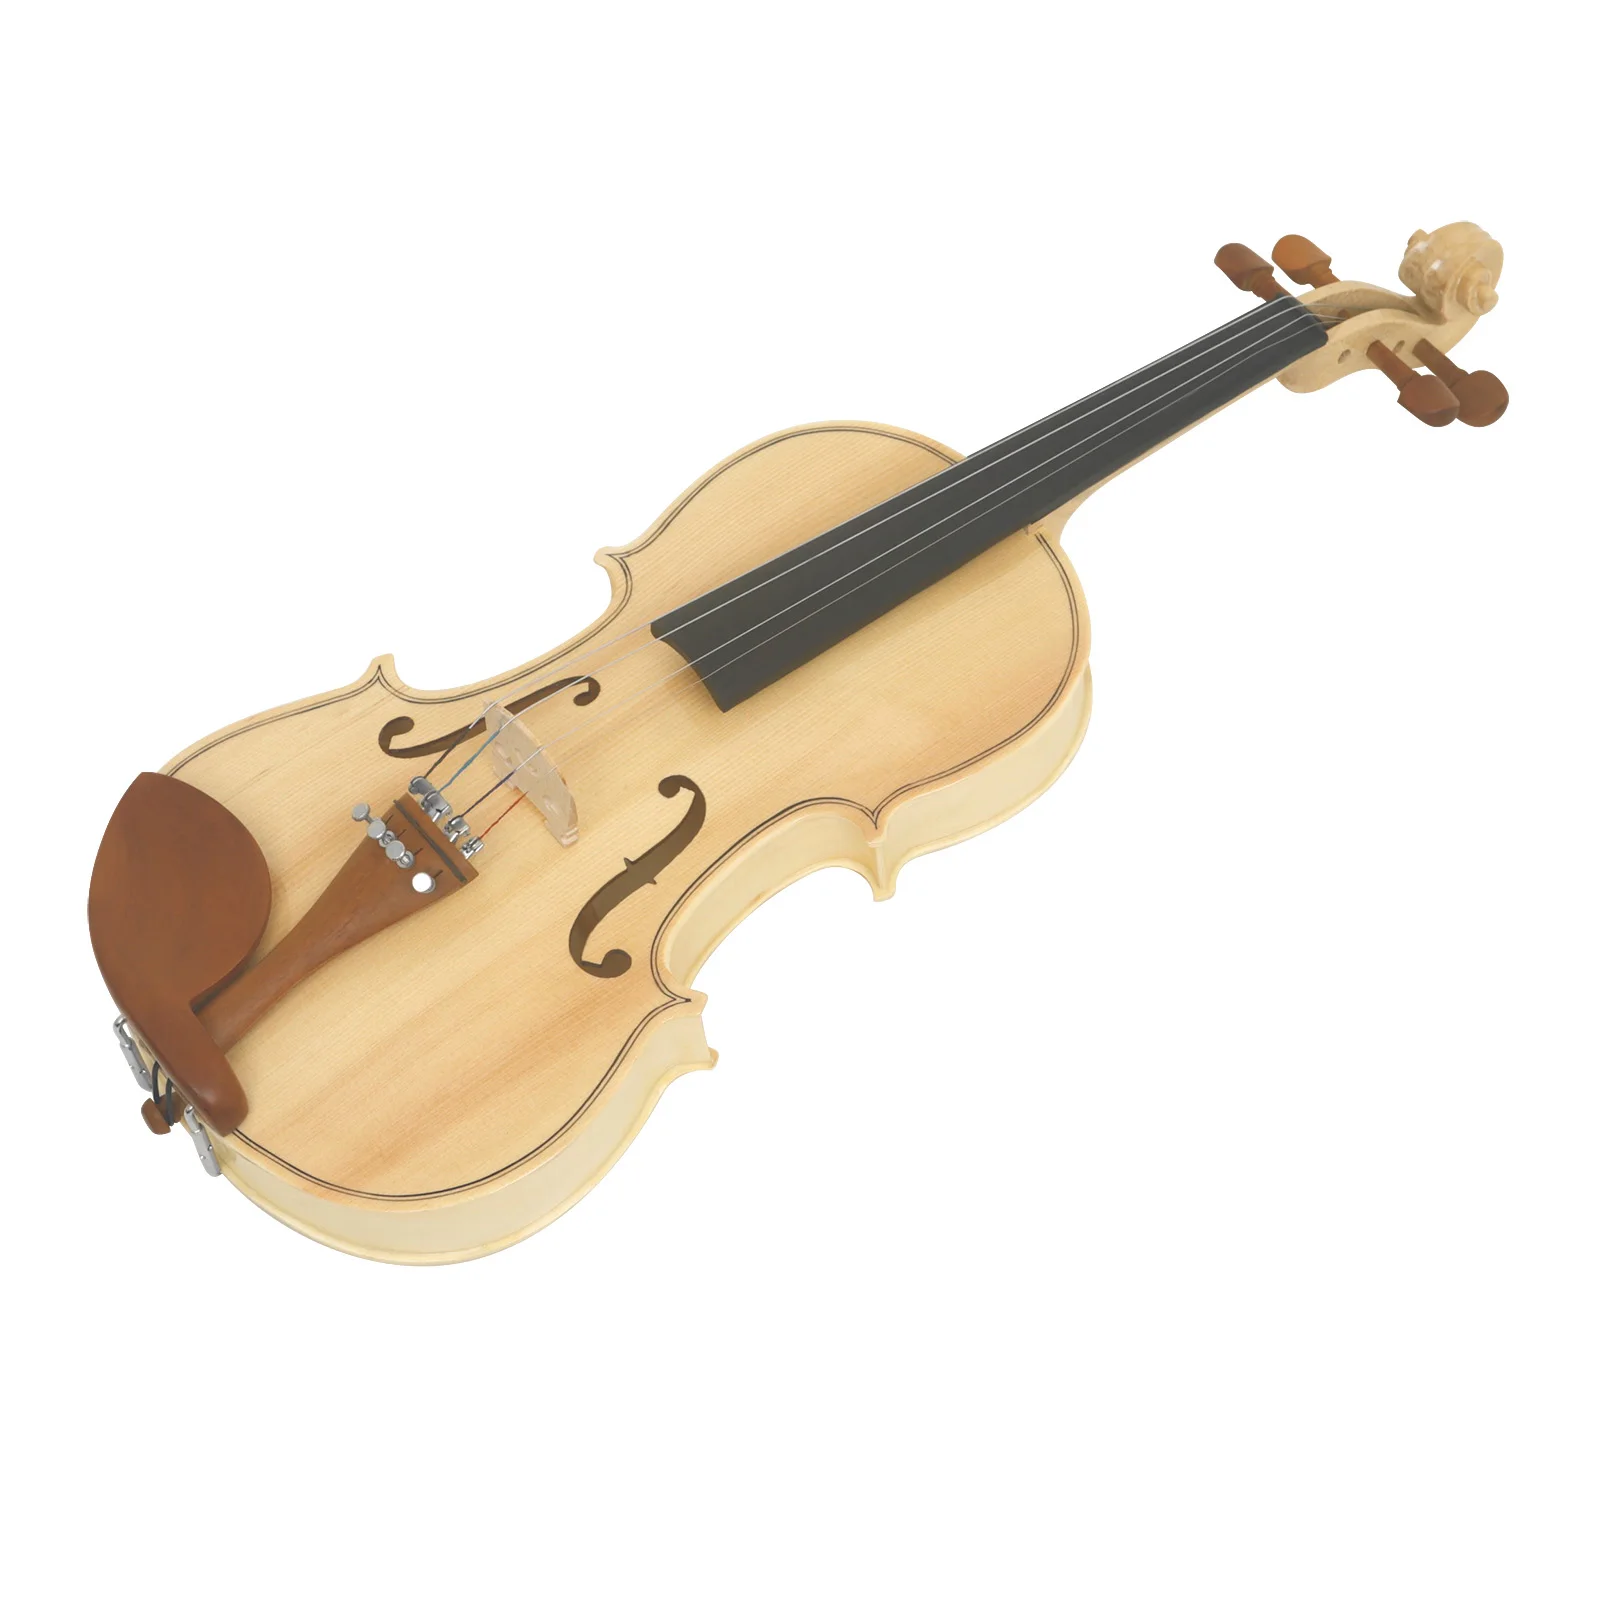 

Astonvilla 4/4 Violin Spruce Top Maple Craft Tiger Stripe Ebony Parts with Spruce Top for Beginners Professionals